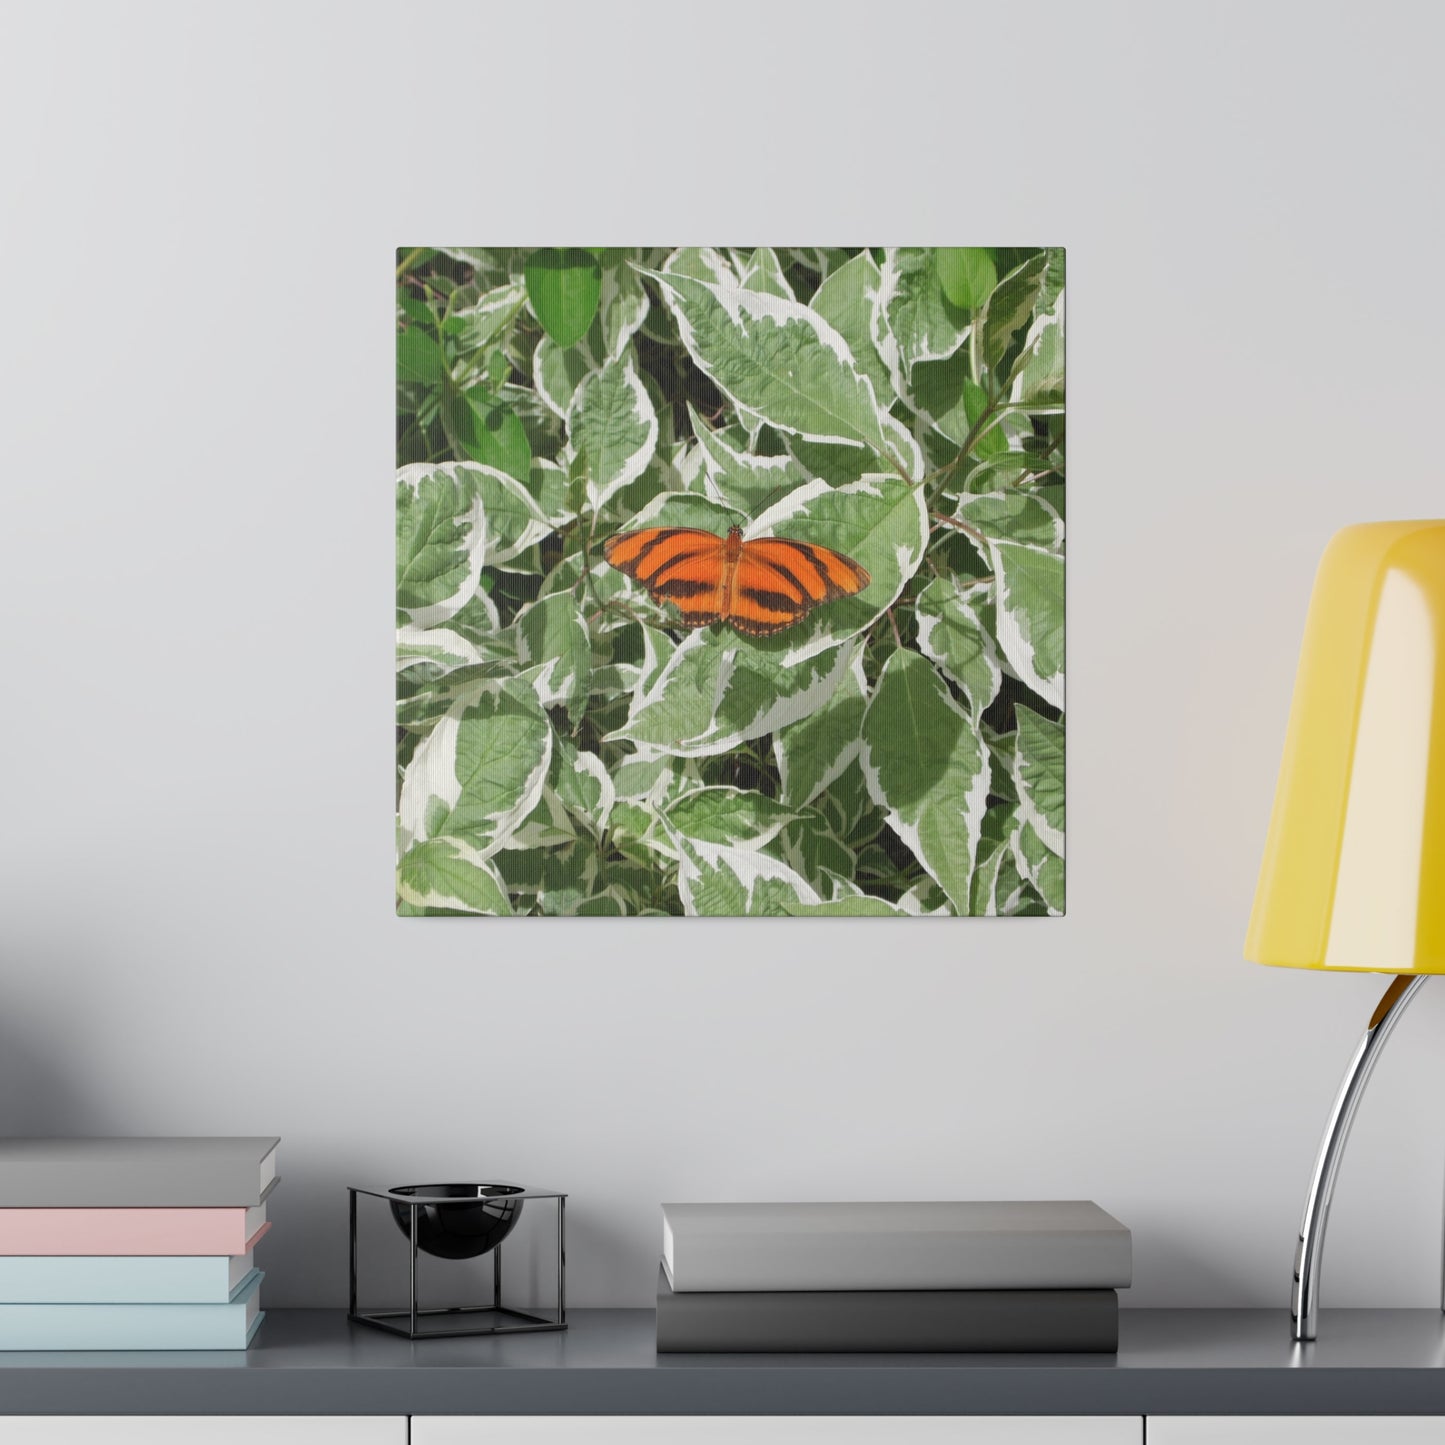 Leaves & Butterfly Square Matte Canvas